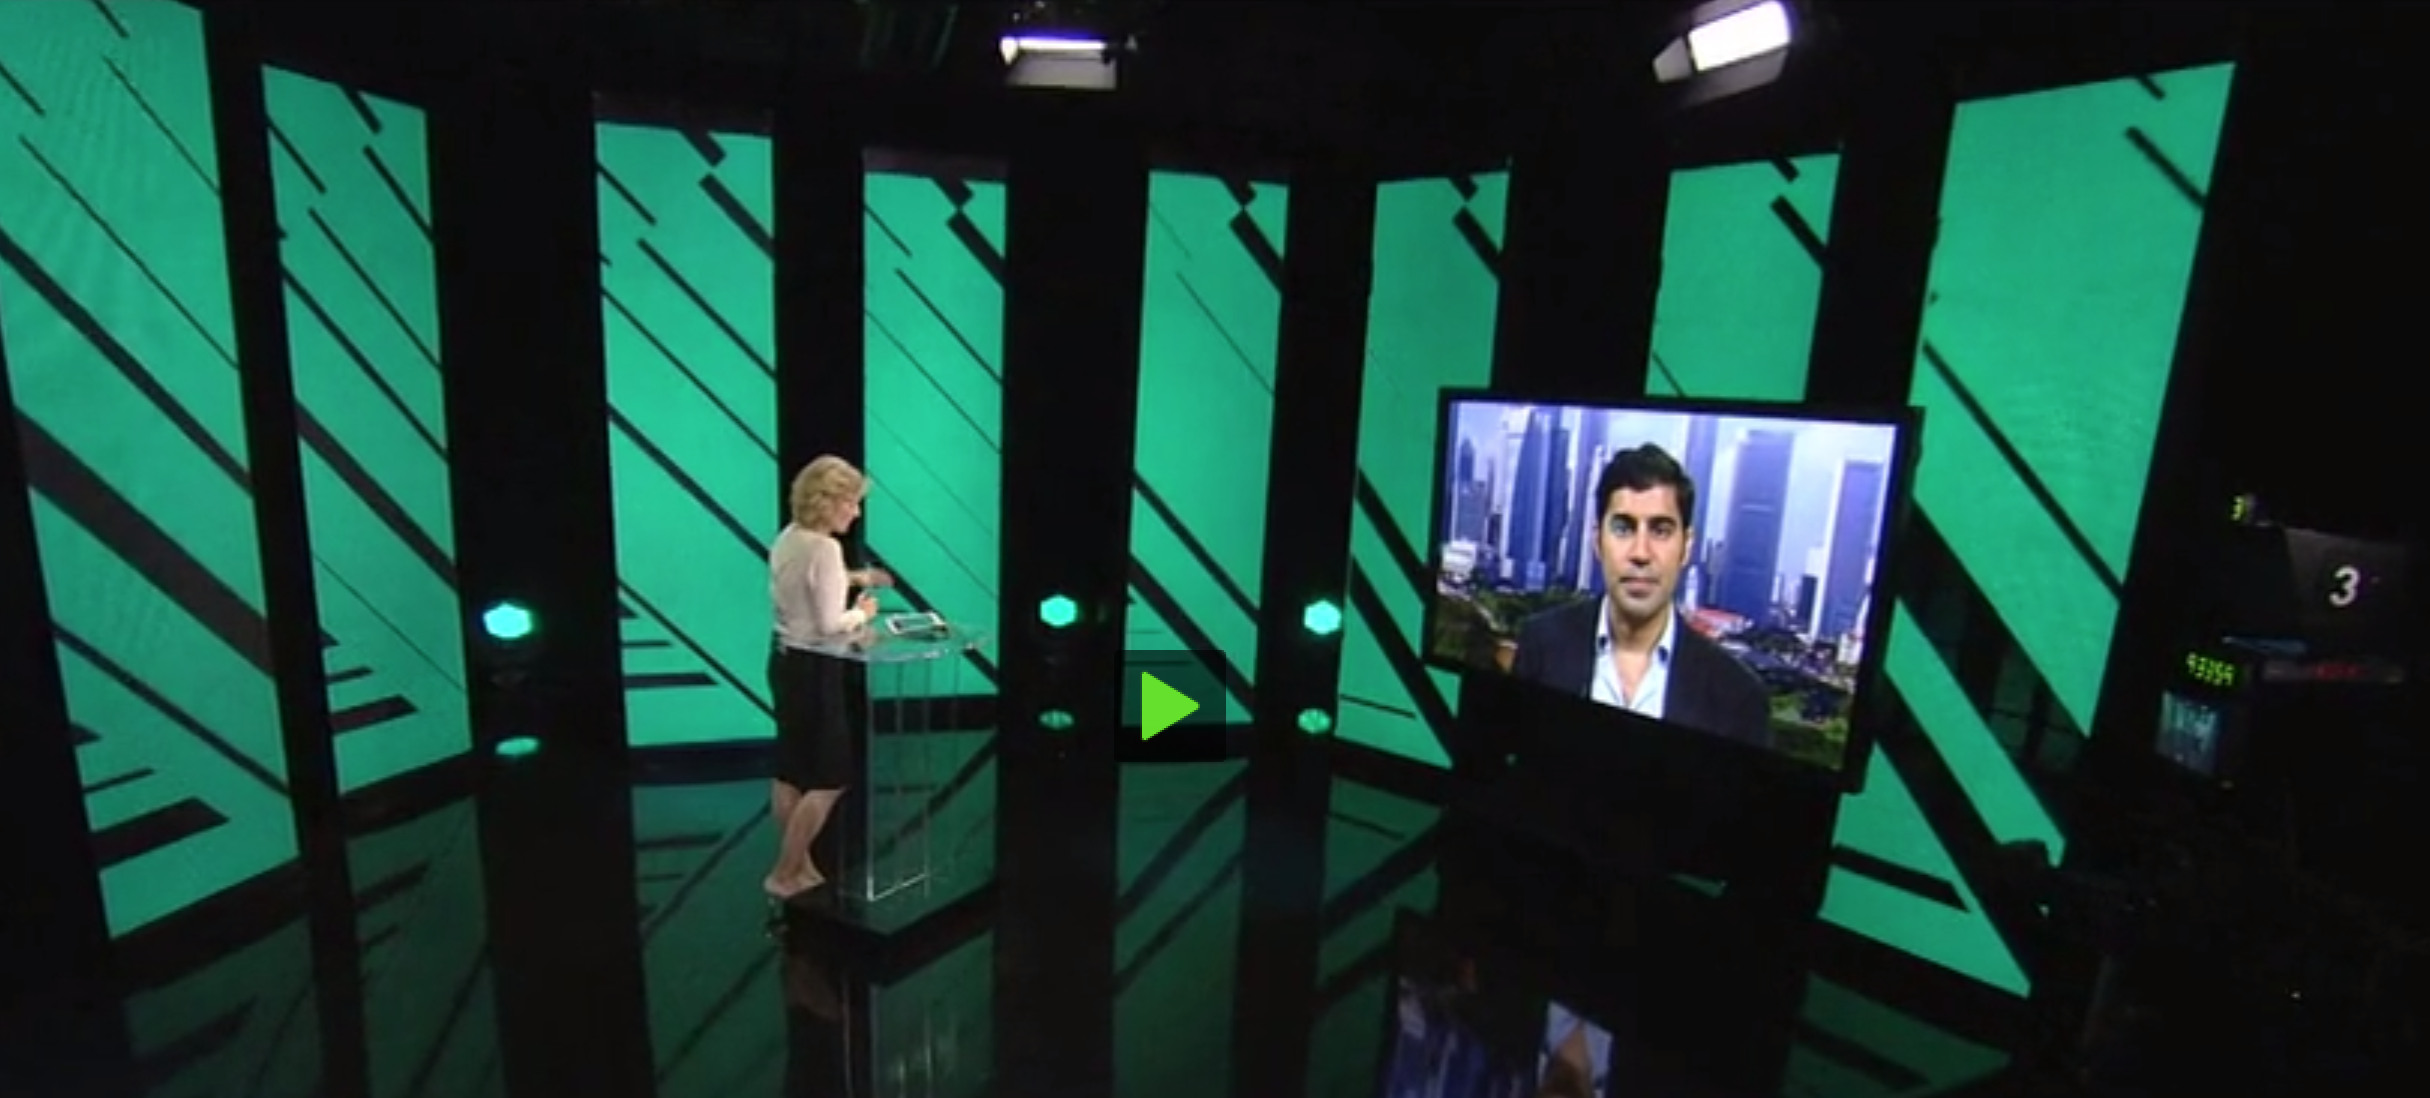 Parag Khanna discusses “Connectography” on Worlds Apart